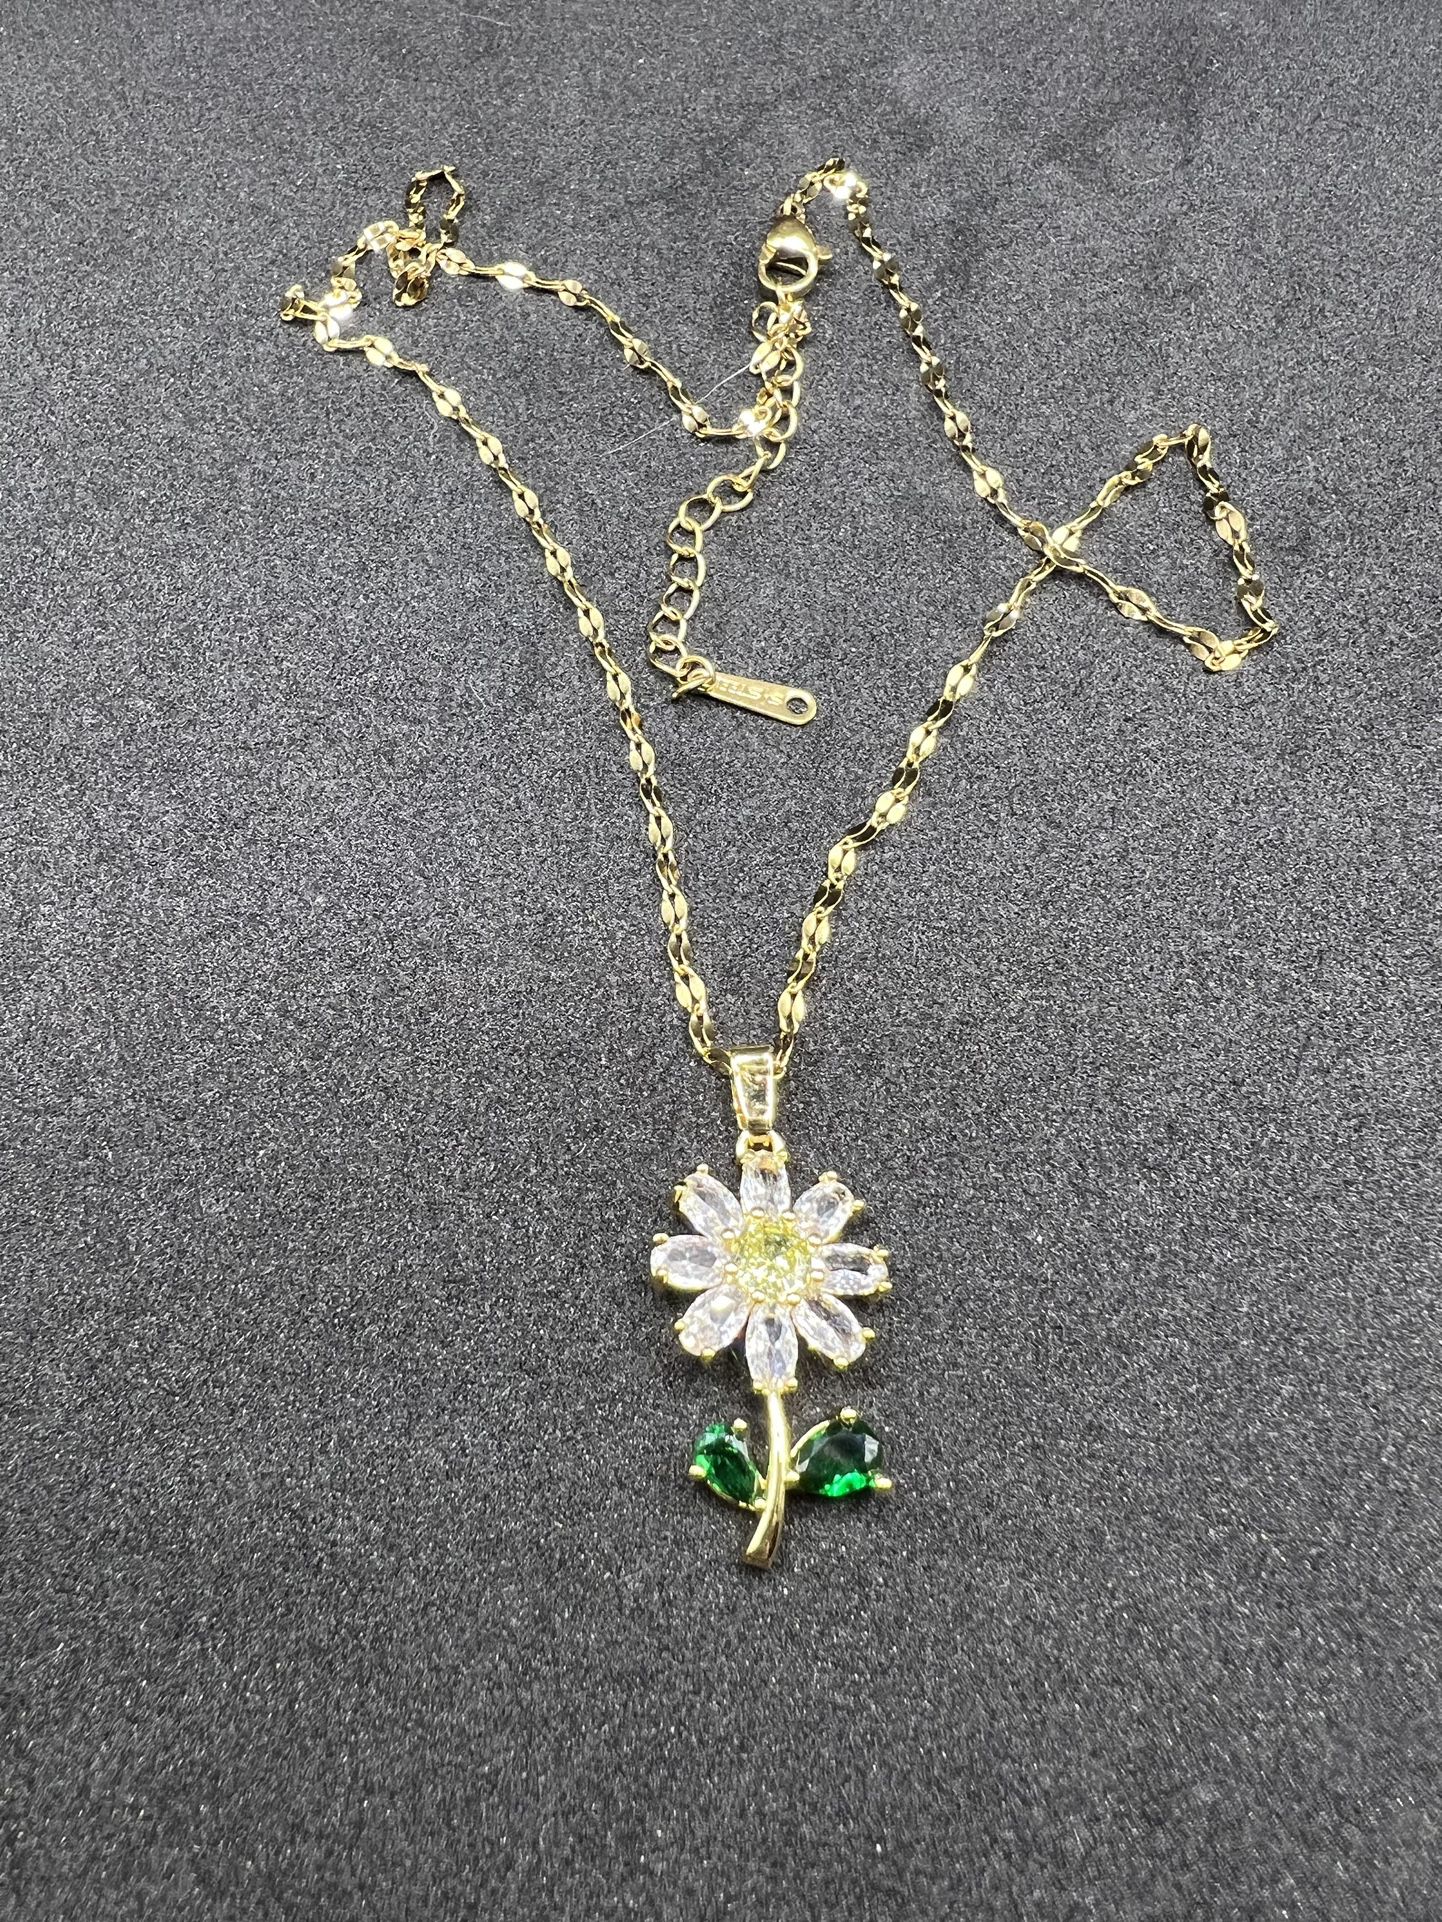 Daisy flower chain necklace